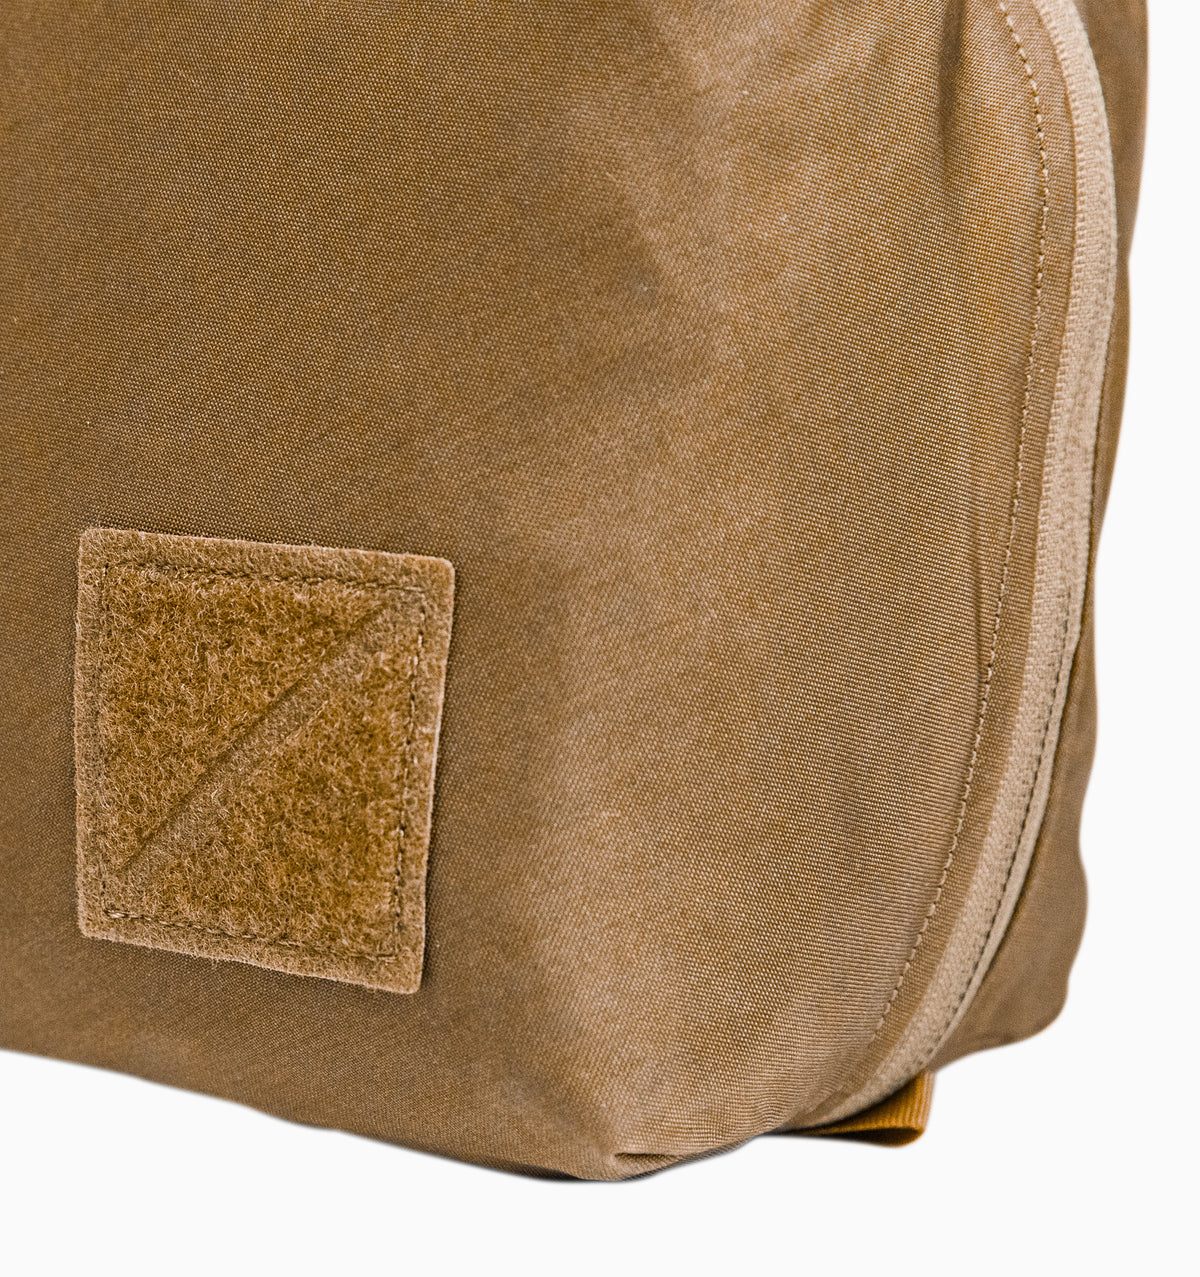 Evergoods Transit Packing Cube 8L - Coyote Brown